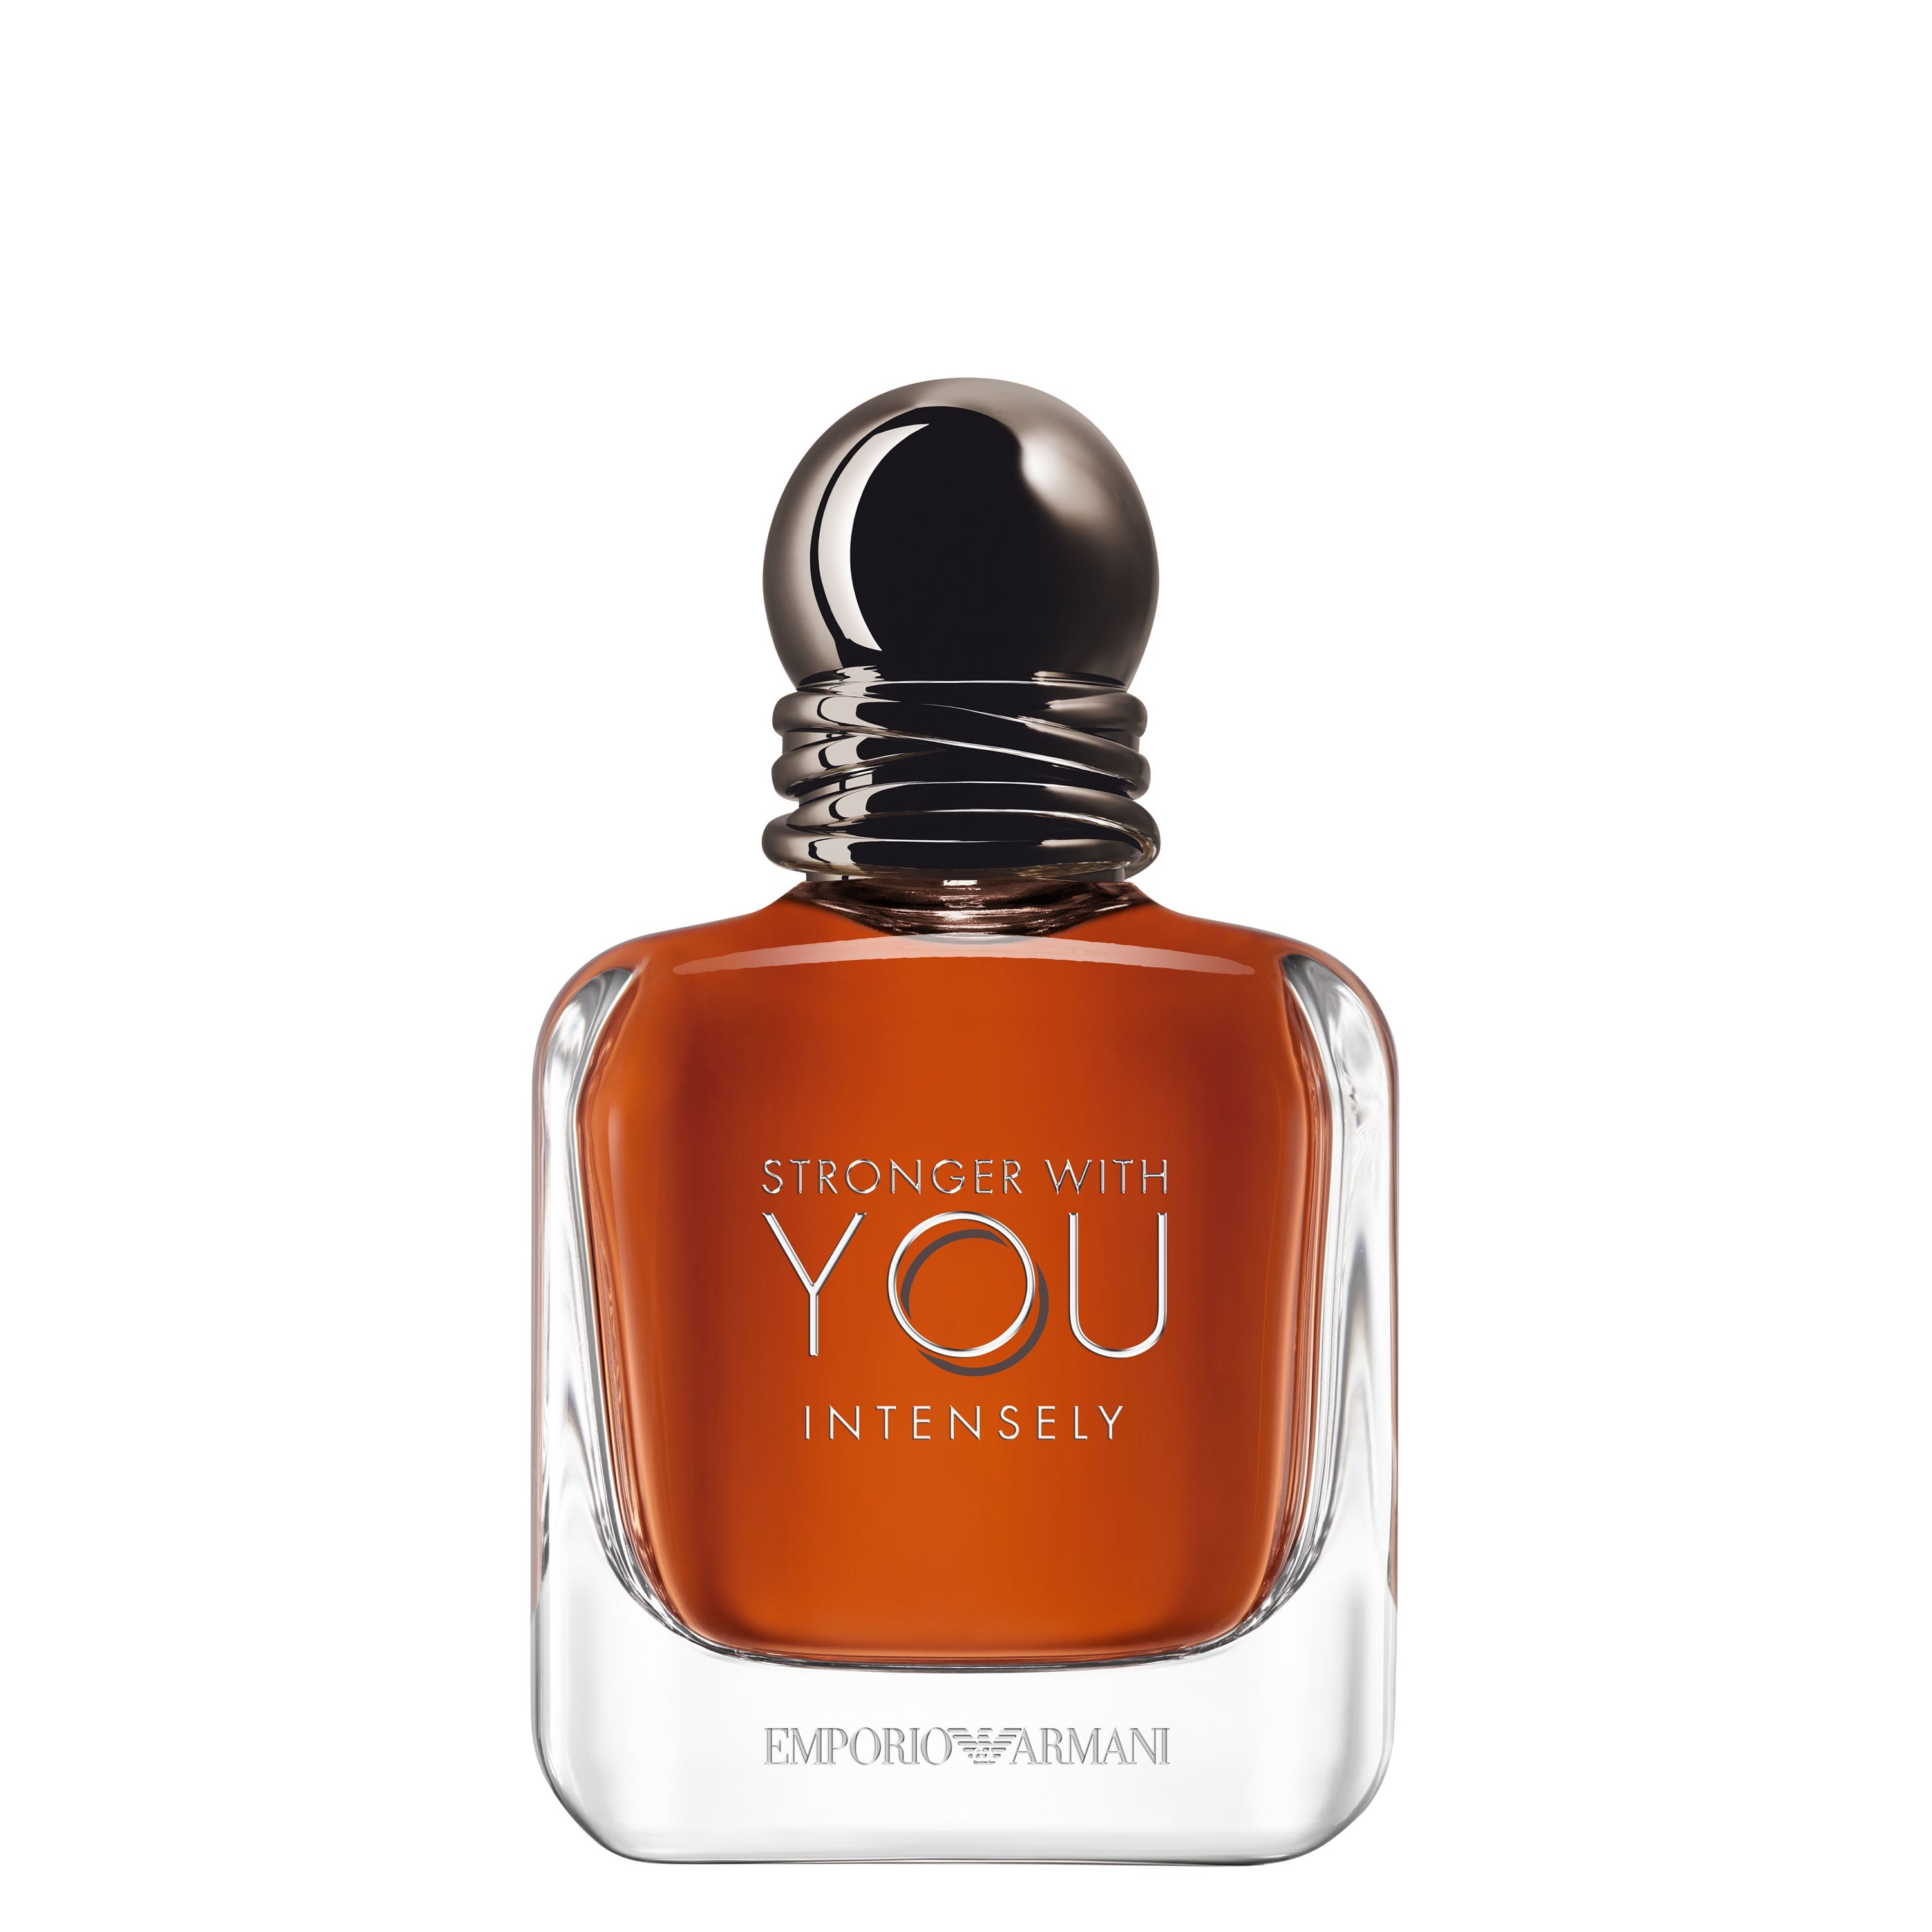 ARMANI - Stronger with You Intensely